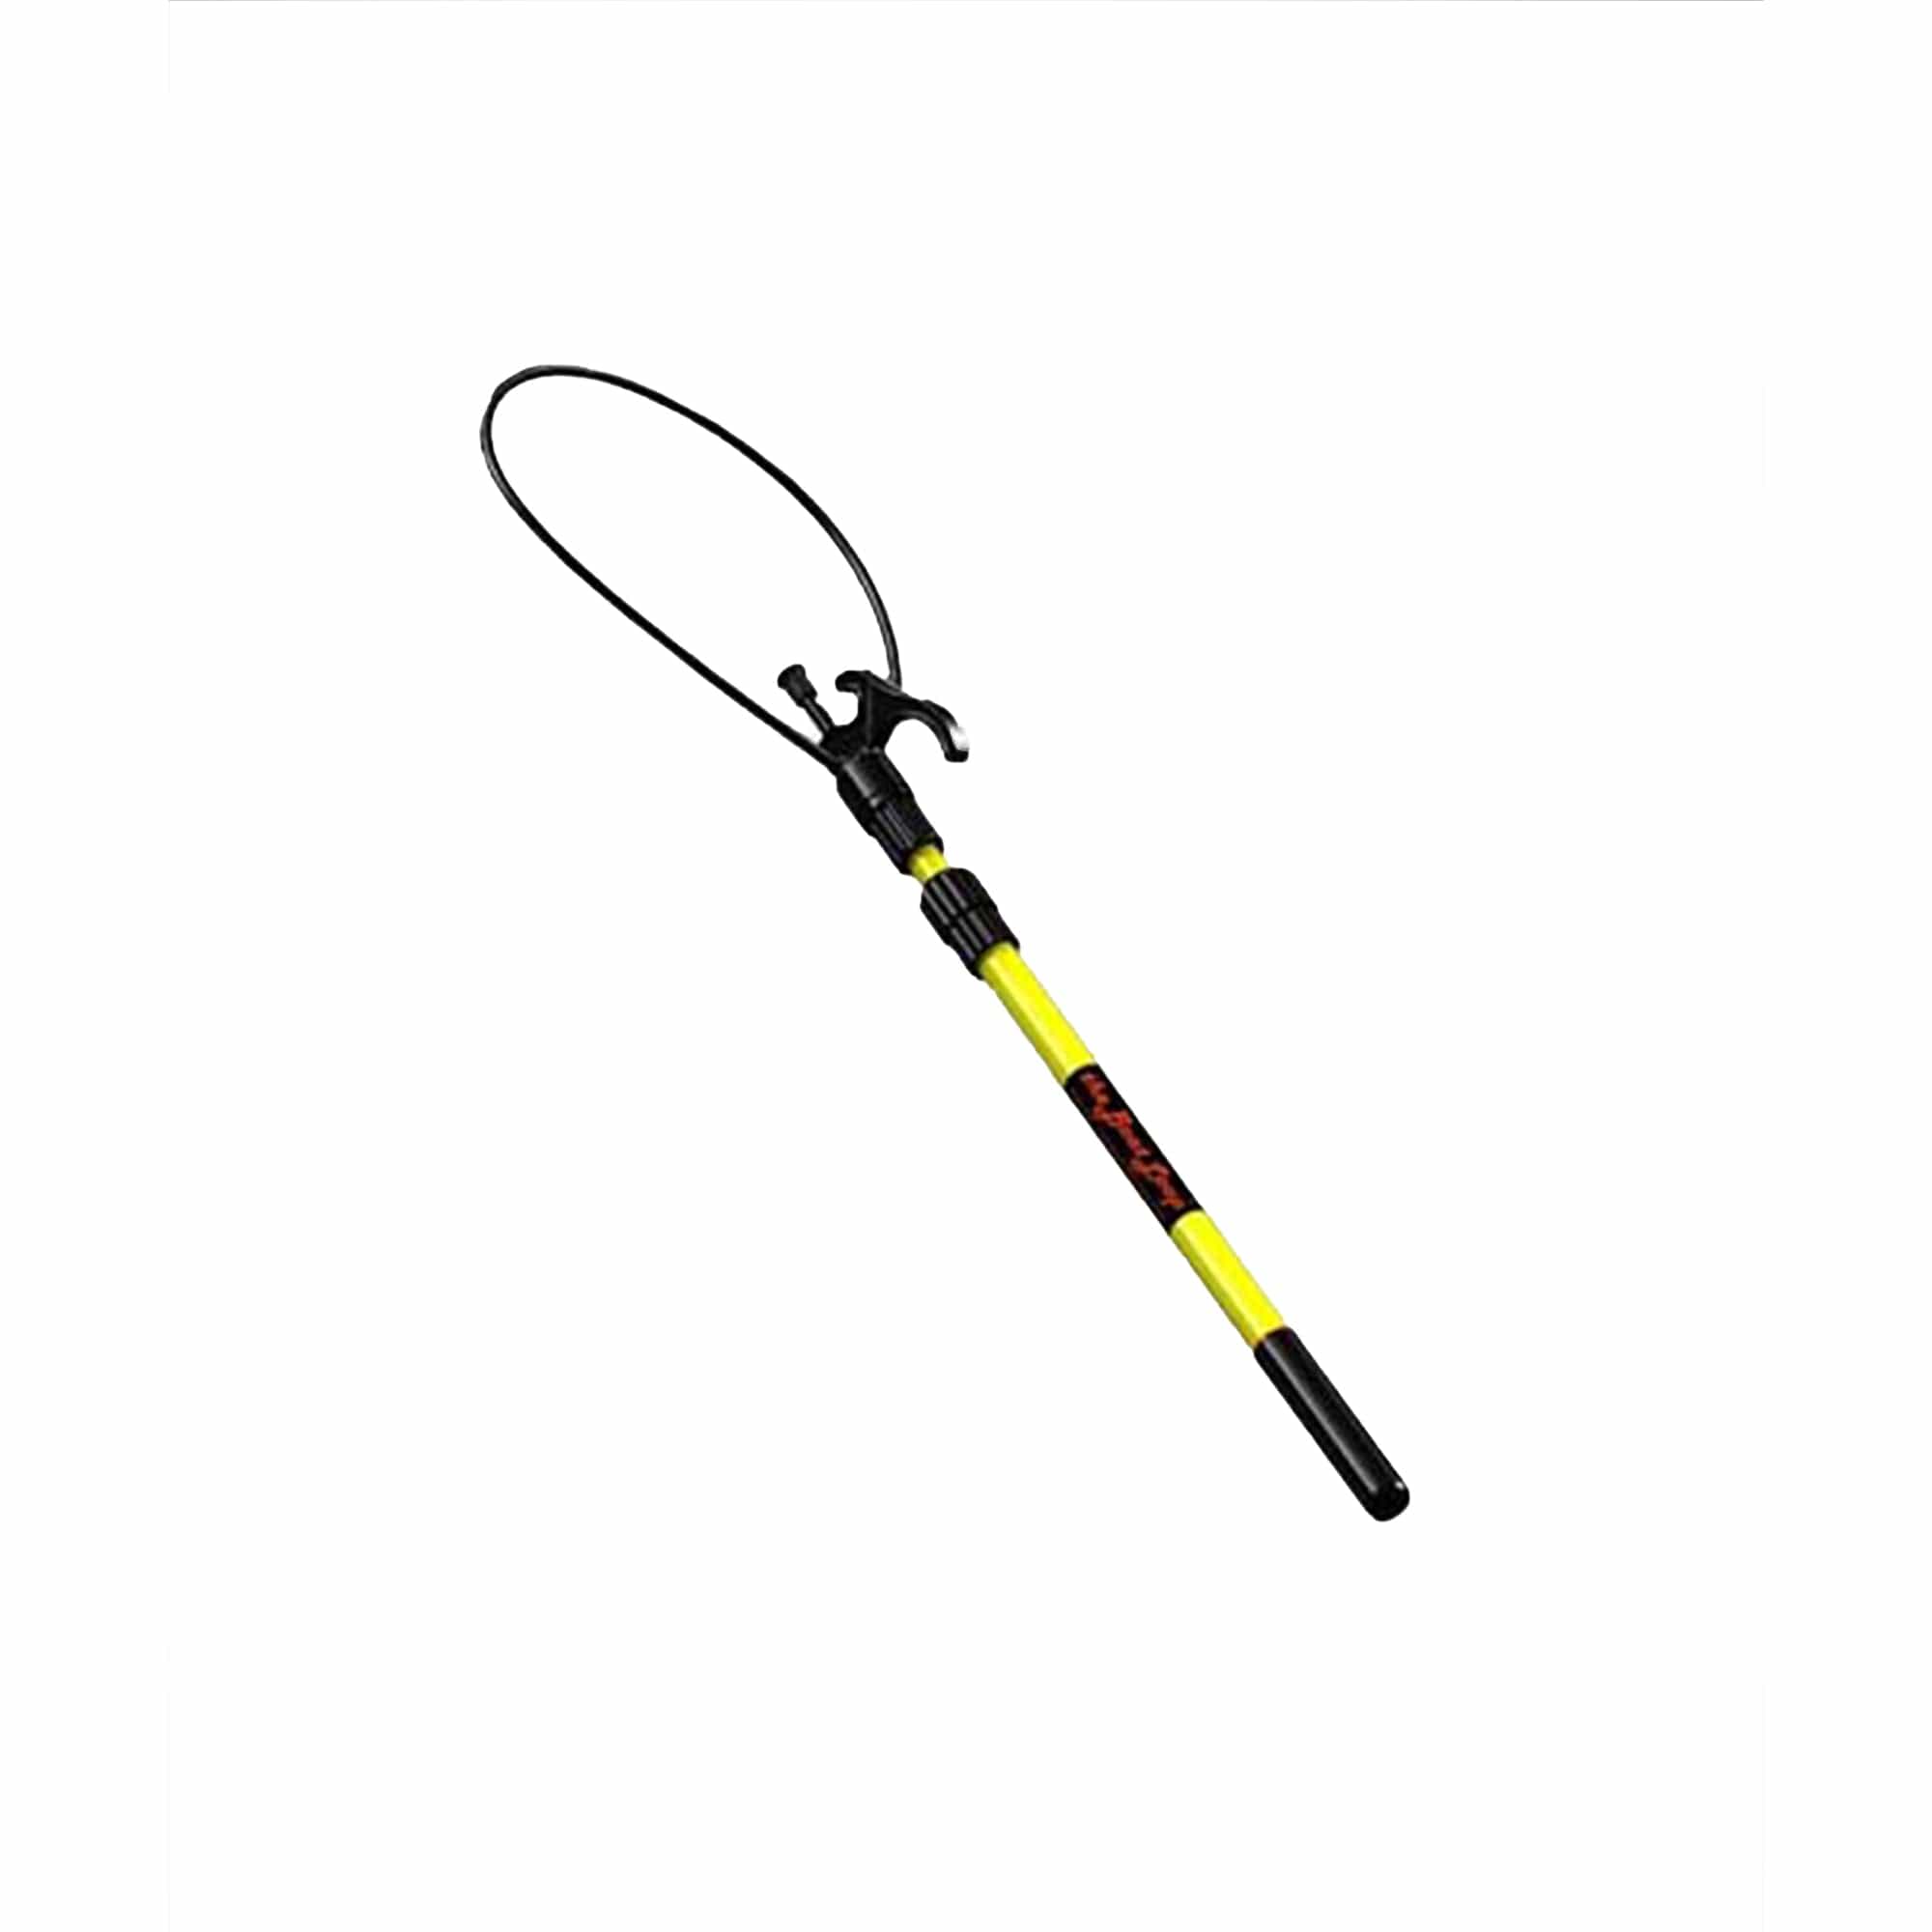 RS Marine MT2-4 The Boat Loop Compact Standard Yellow 46-64" Essential Docking Tool